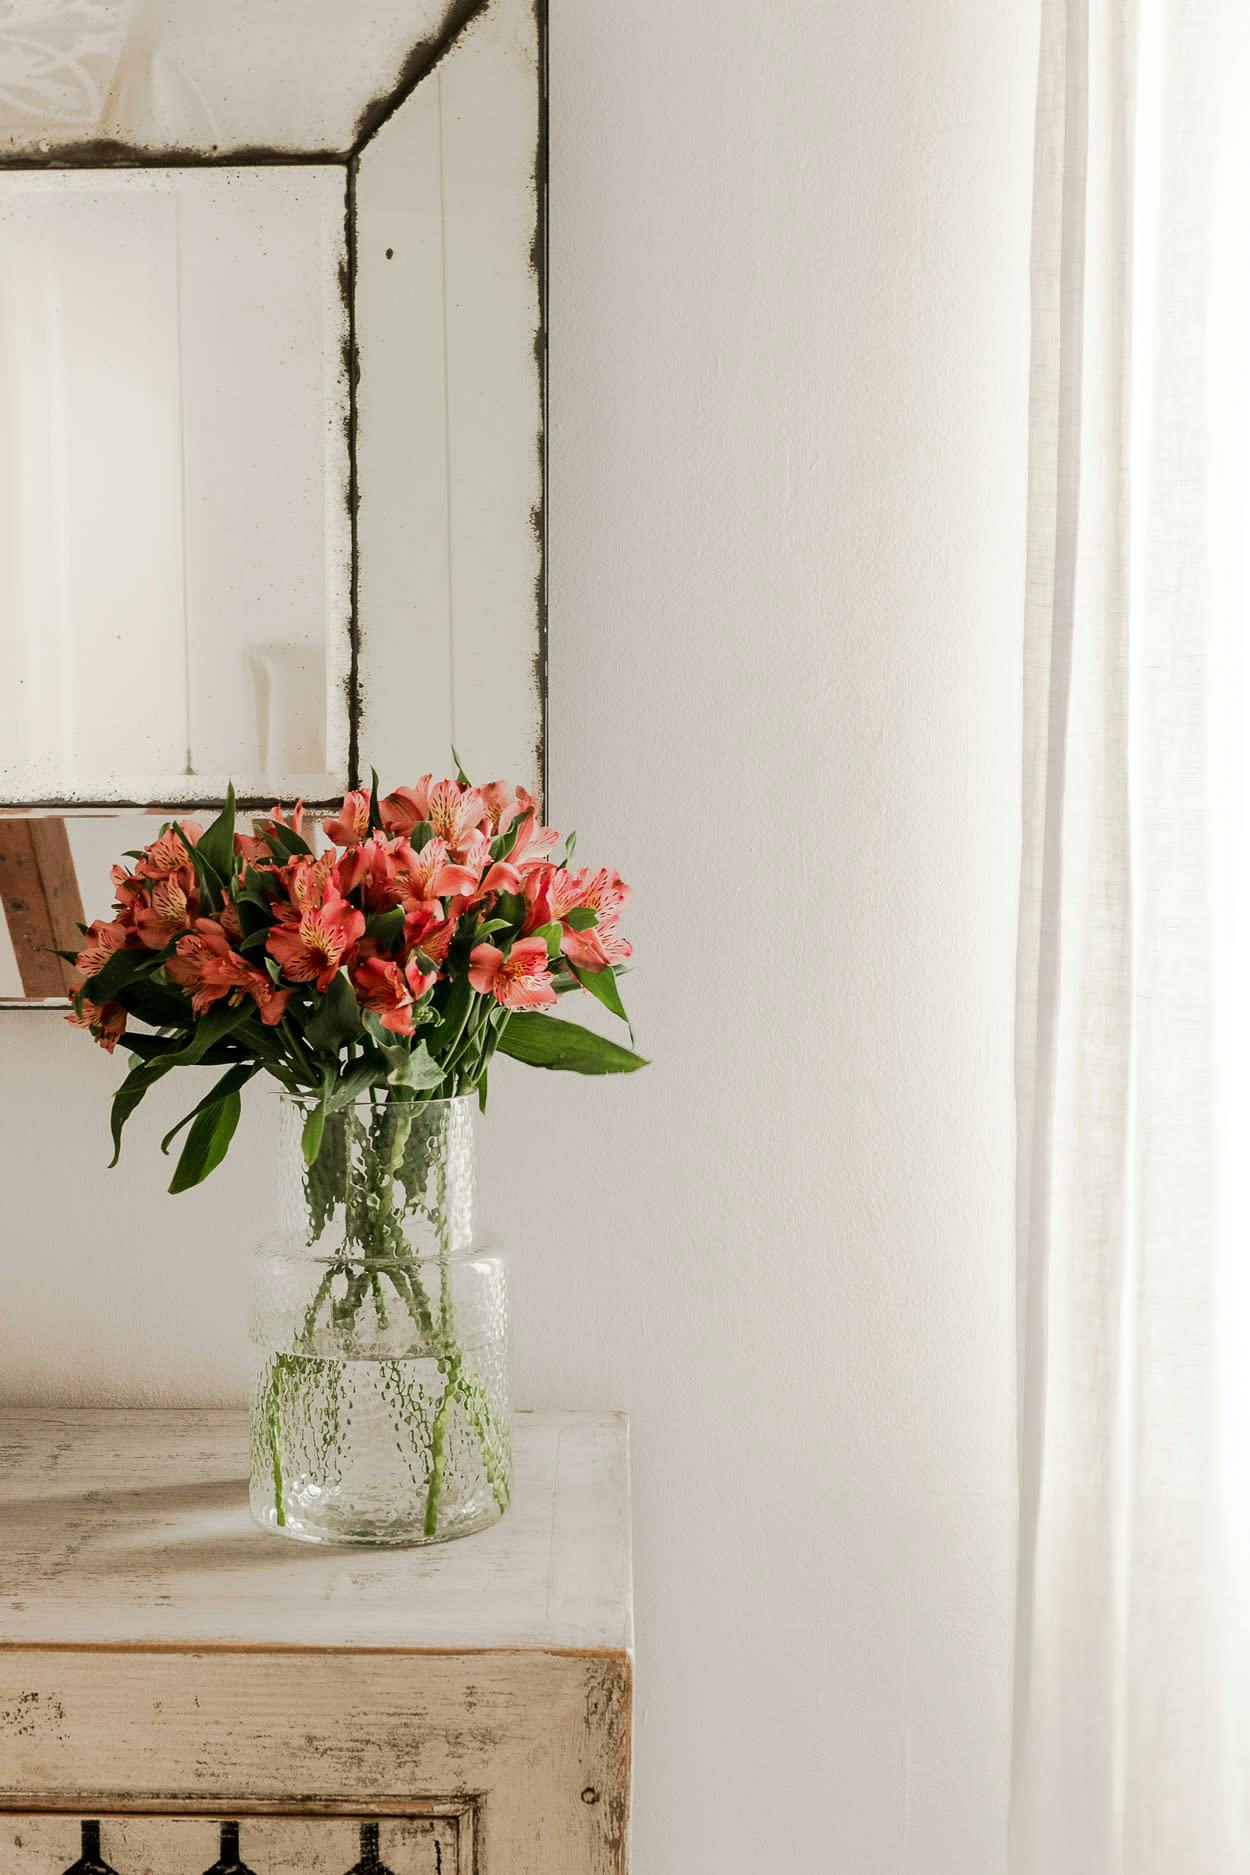 A vase filled with red and orange flowers is placed on a small table next to a mirror, creating a visually appealing and harmonious arrangement.